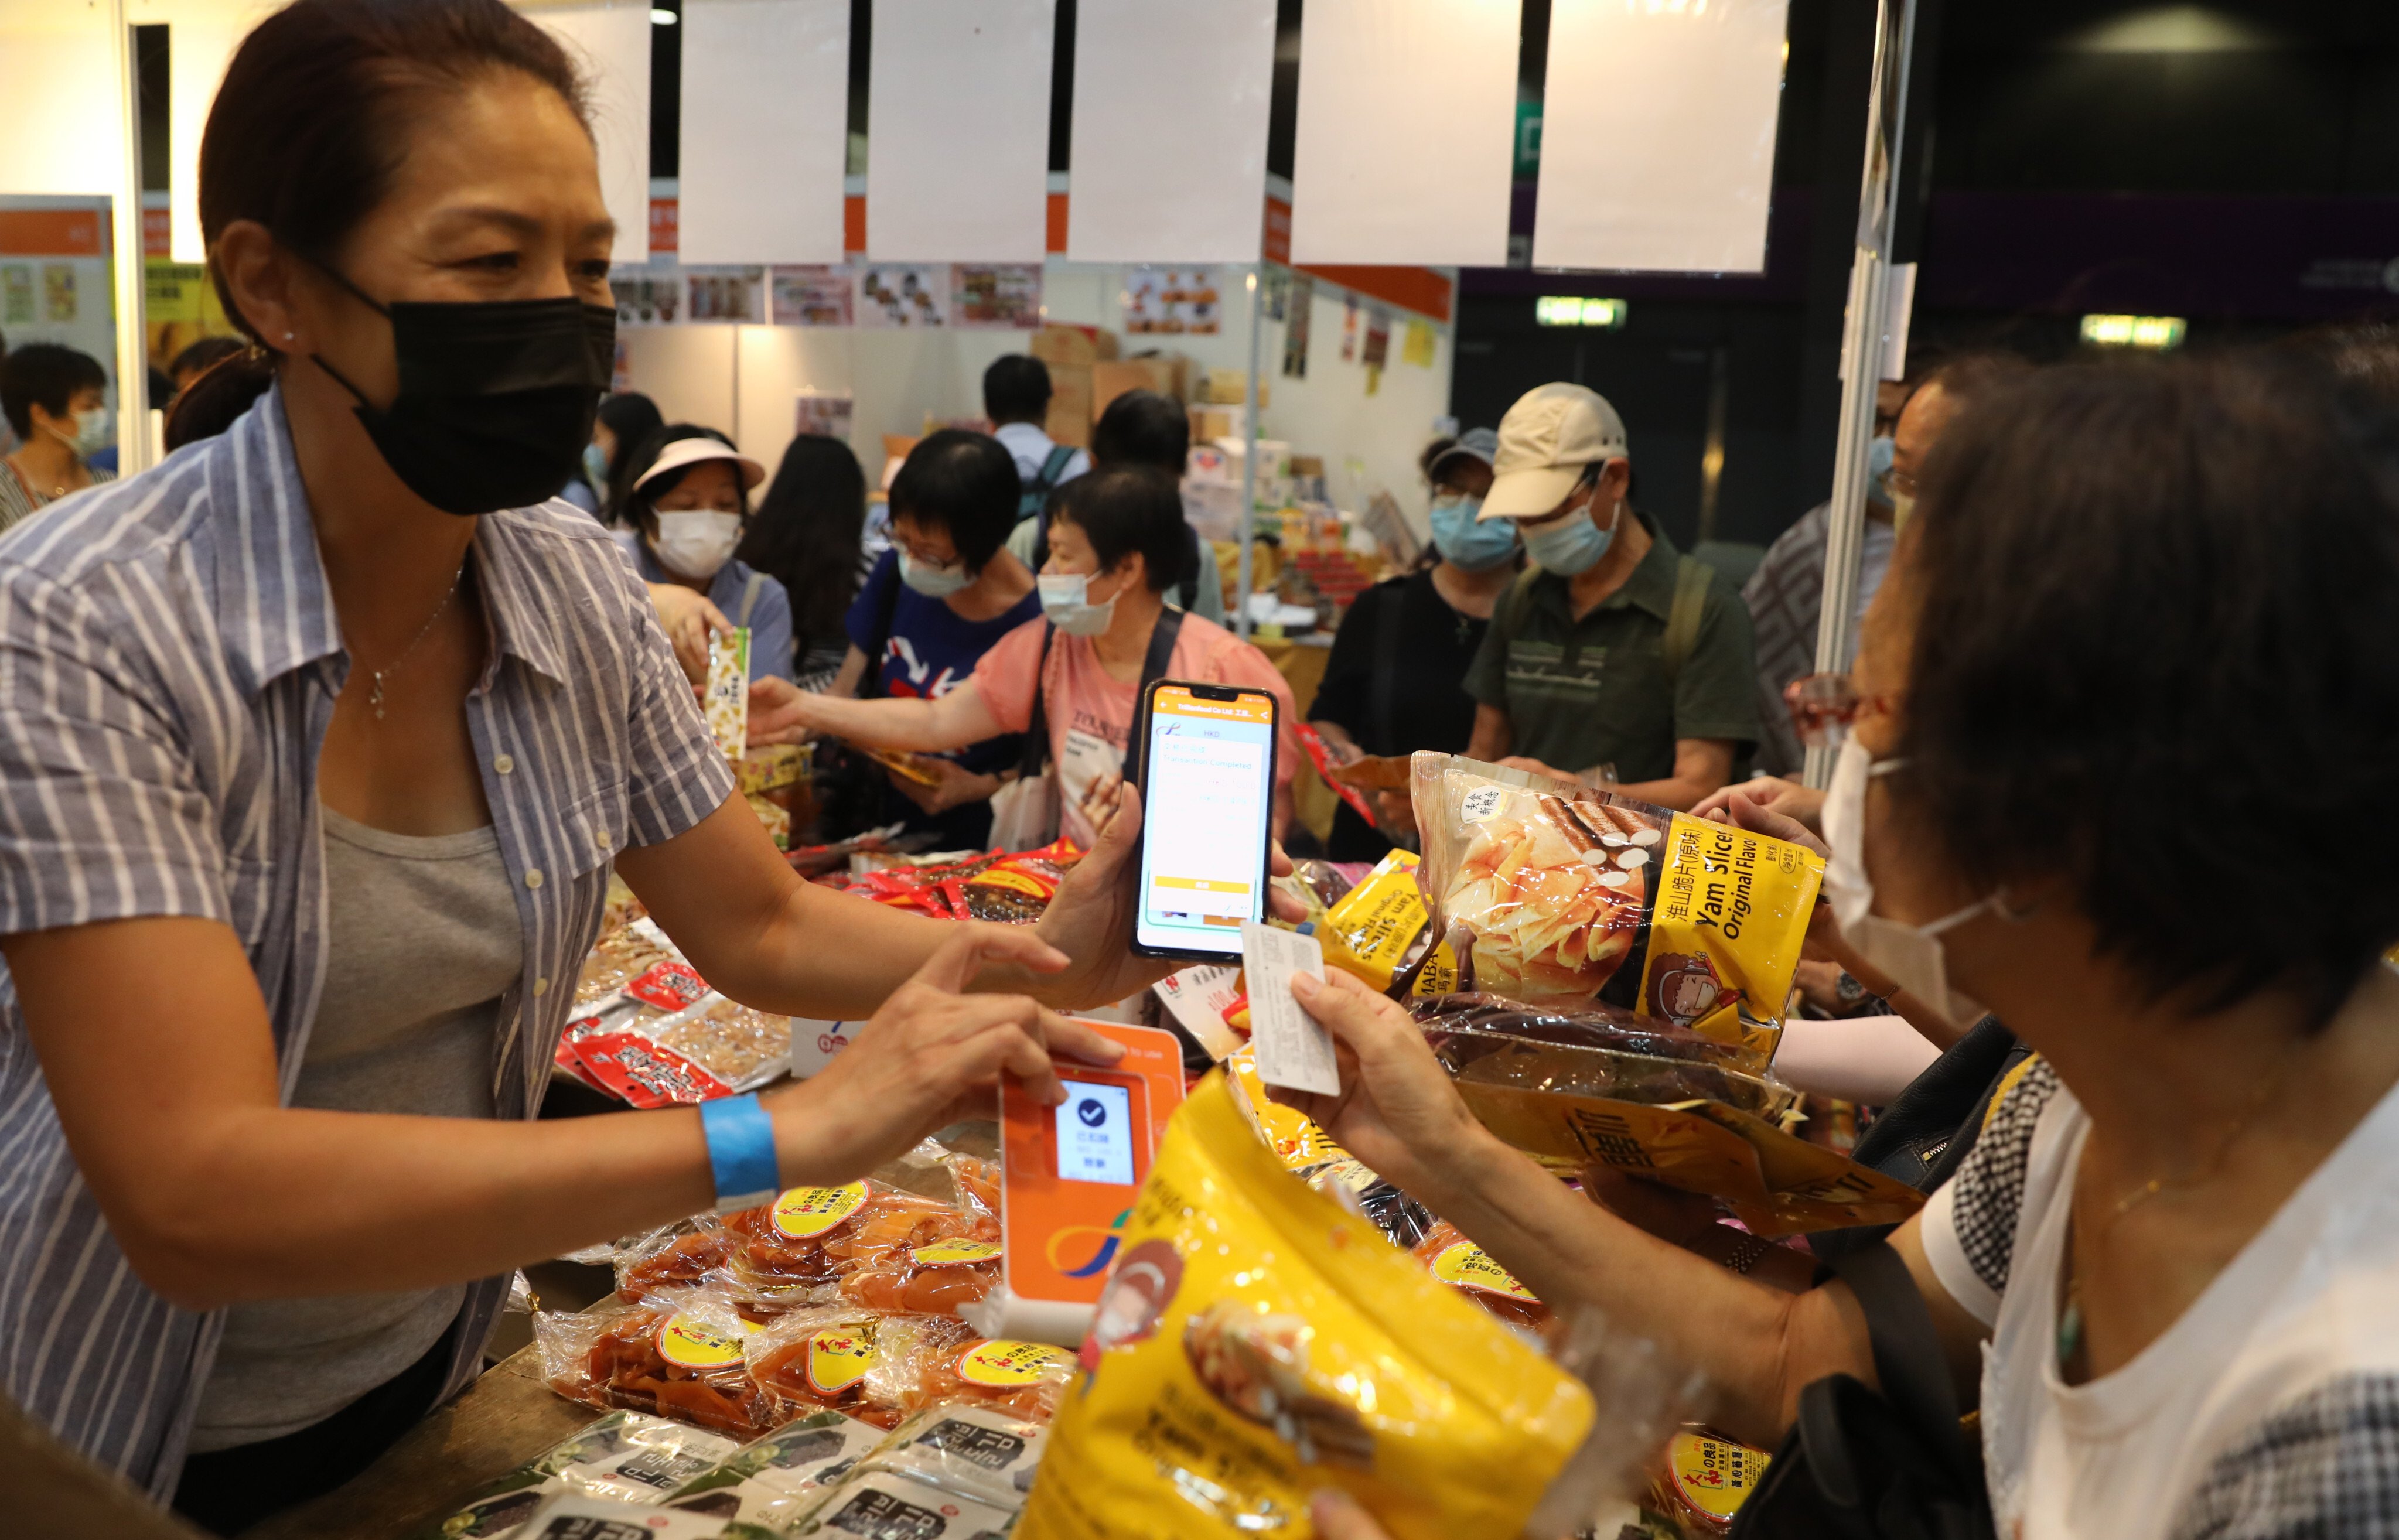 Visitors to the Hong Kong Brands and Products Shopping Expo, at Asia World Expo, make purchases with their digital shopping vouchers on August 7. Photo: Winson Wong